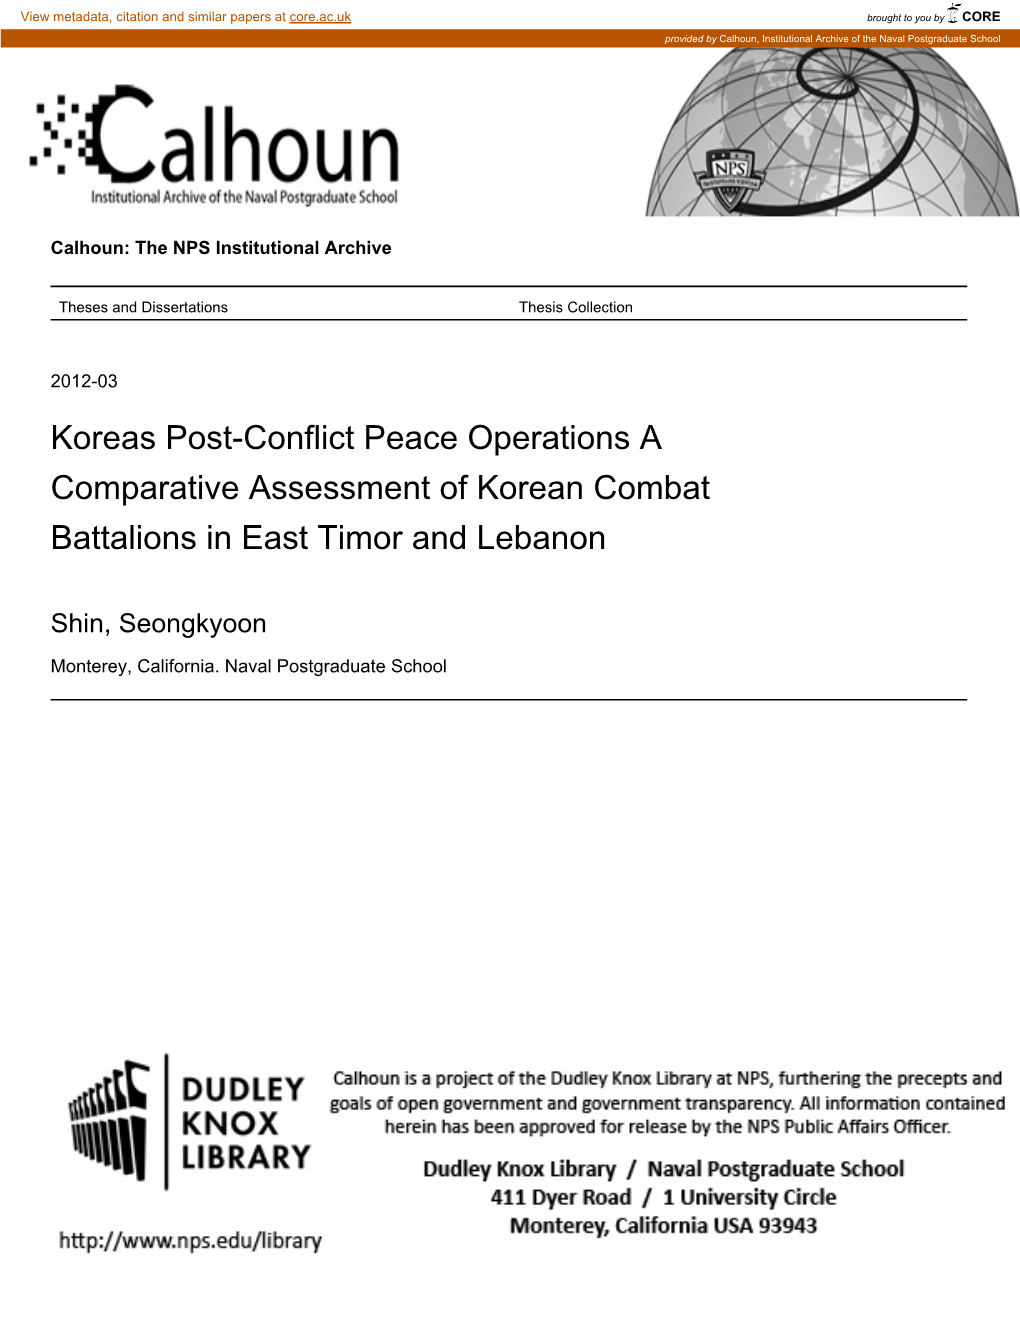 Koreas Post-Conflict Peace Operations a Comparative Assessment of Korean Combat Battalions in East Timor and Lebanon